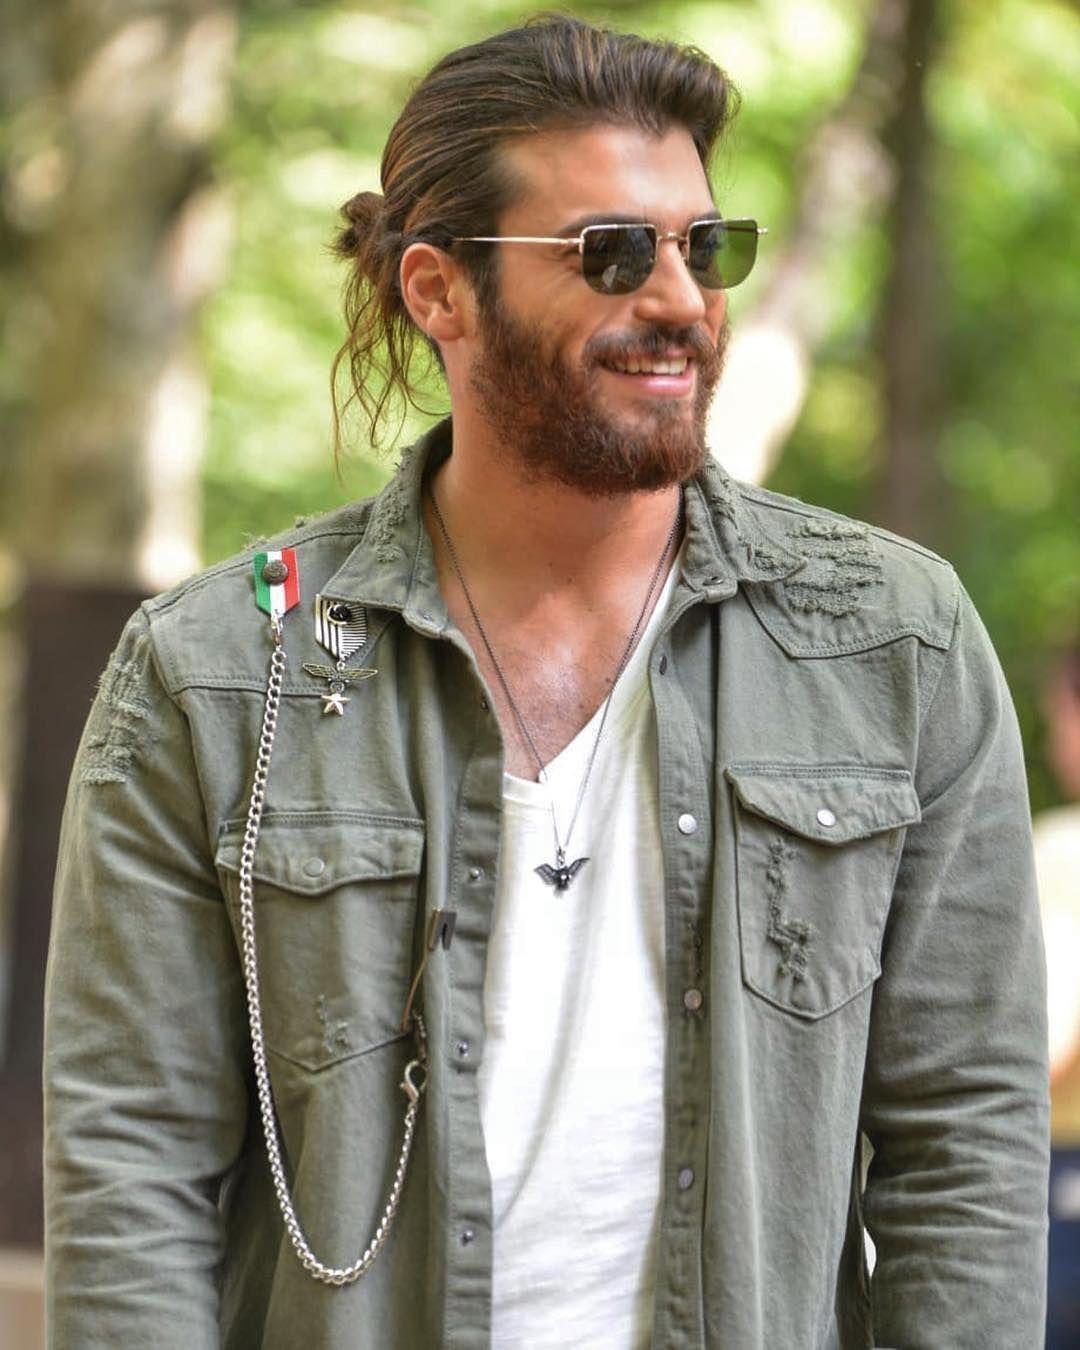 The Ultimate Collection of Can Yaman HD Images Top 999+ Stunning